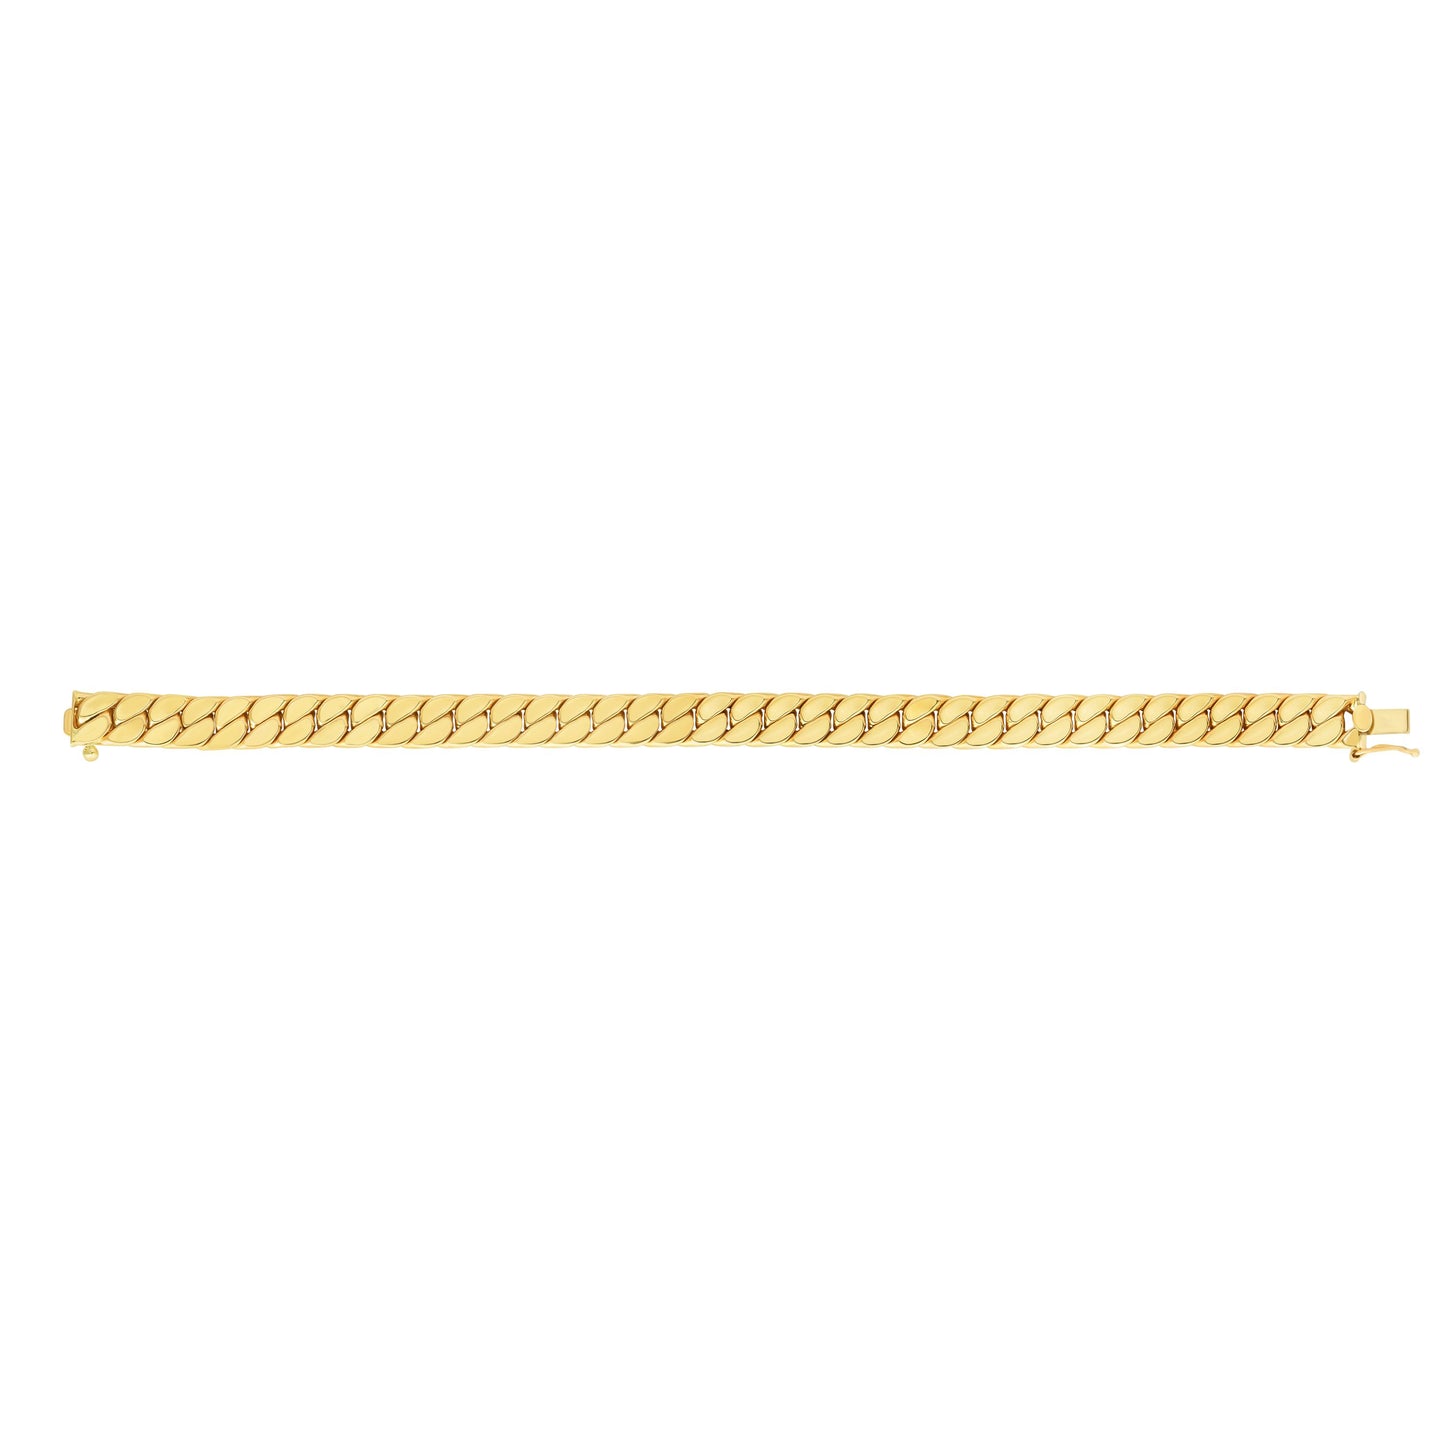 14K Gold Polished Men's Miami Curb Chain Bracelet with Box Figure 8 Clasp